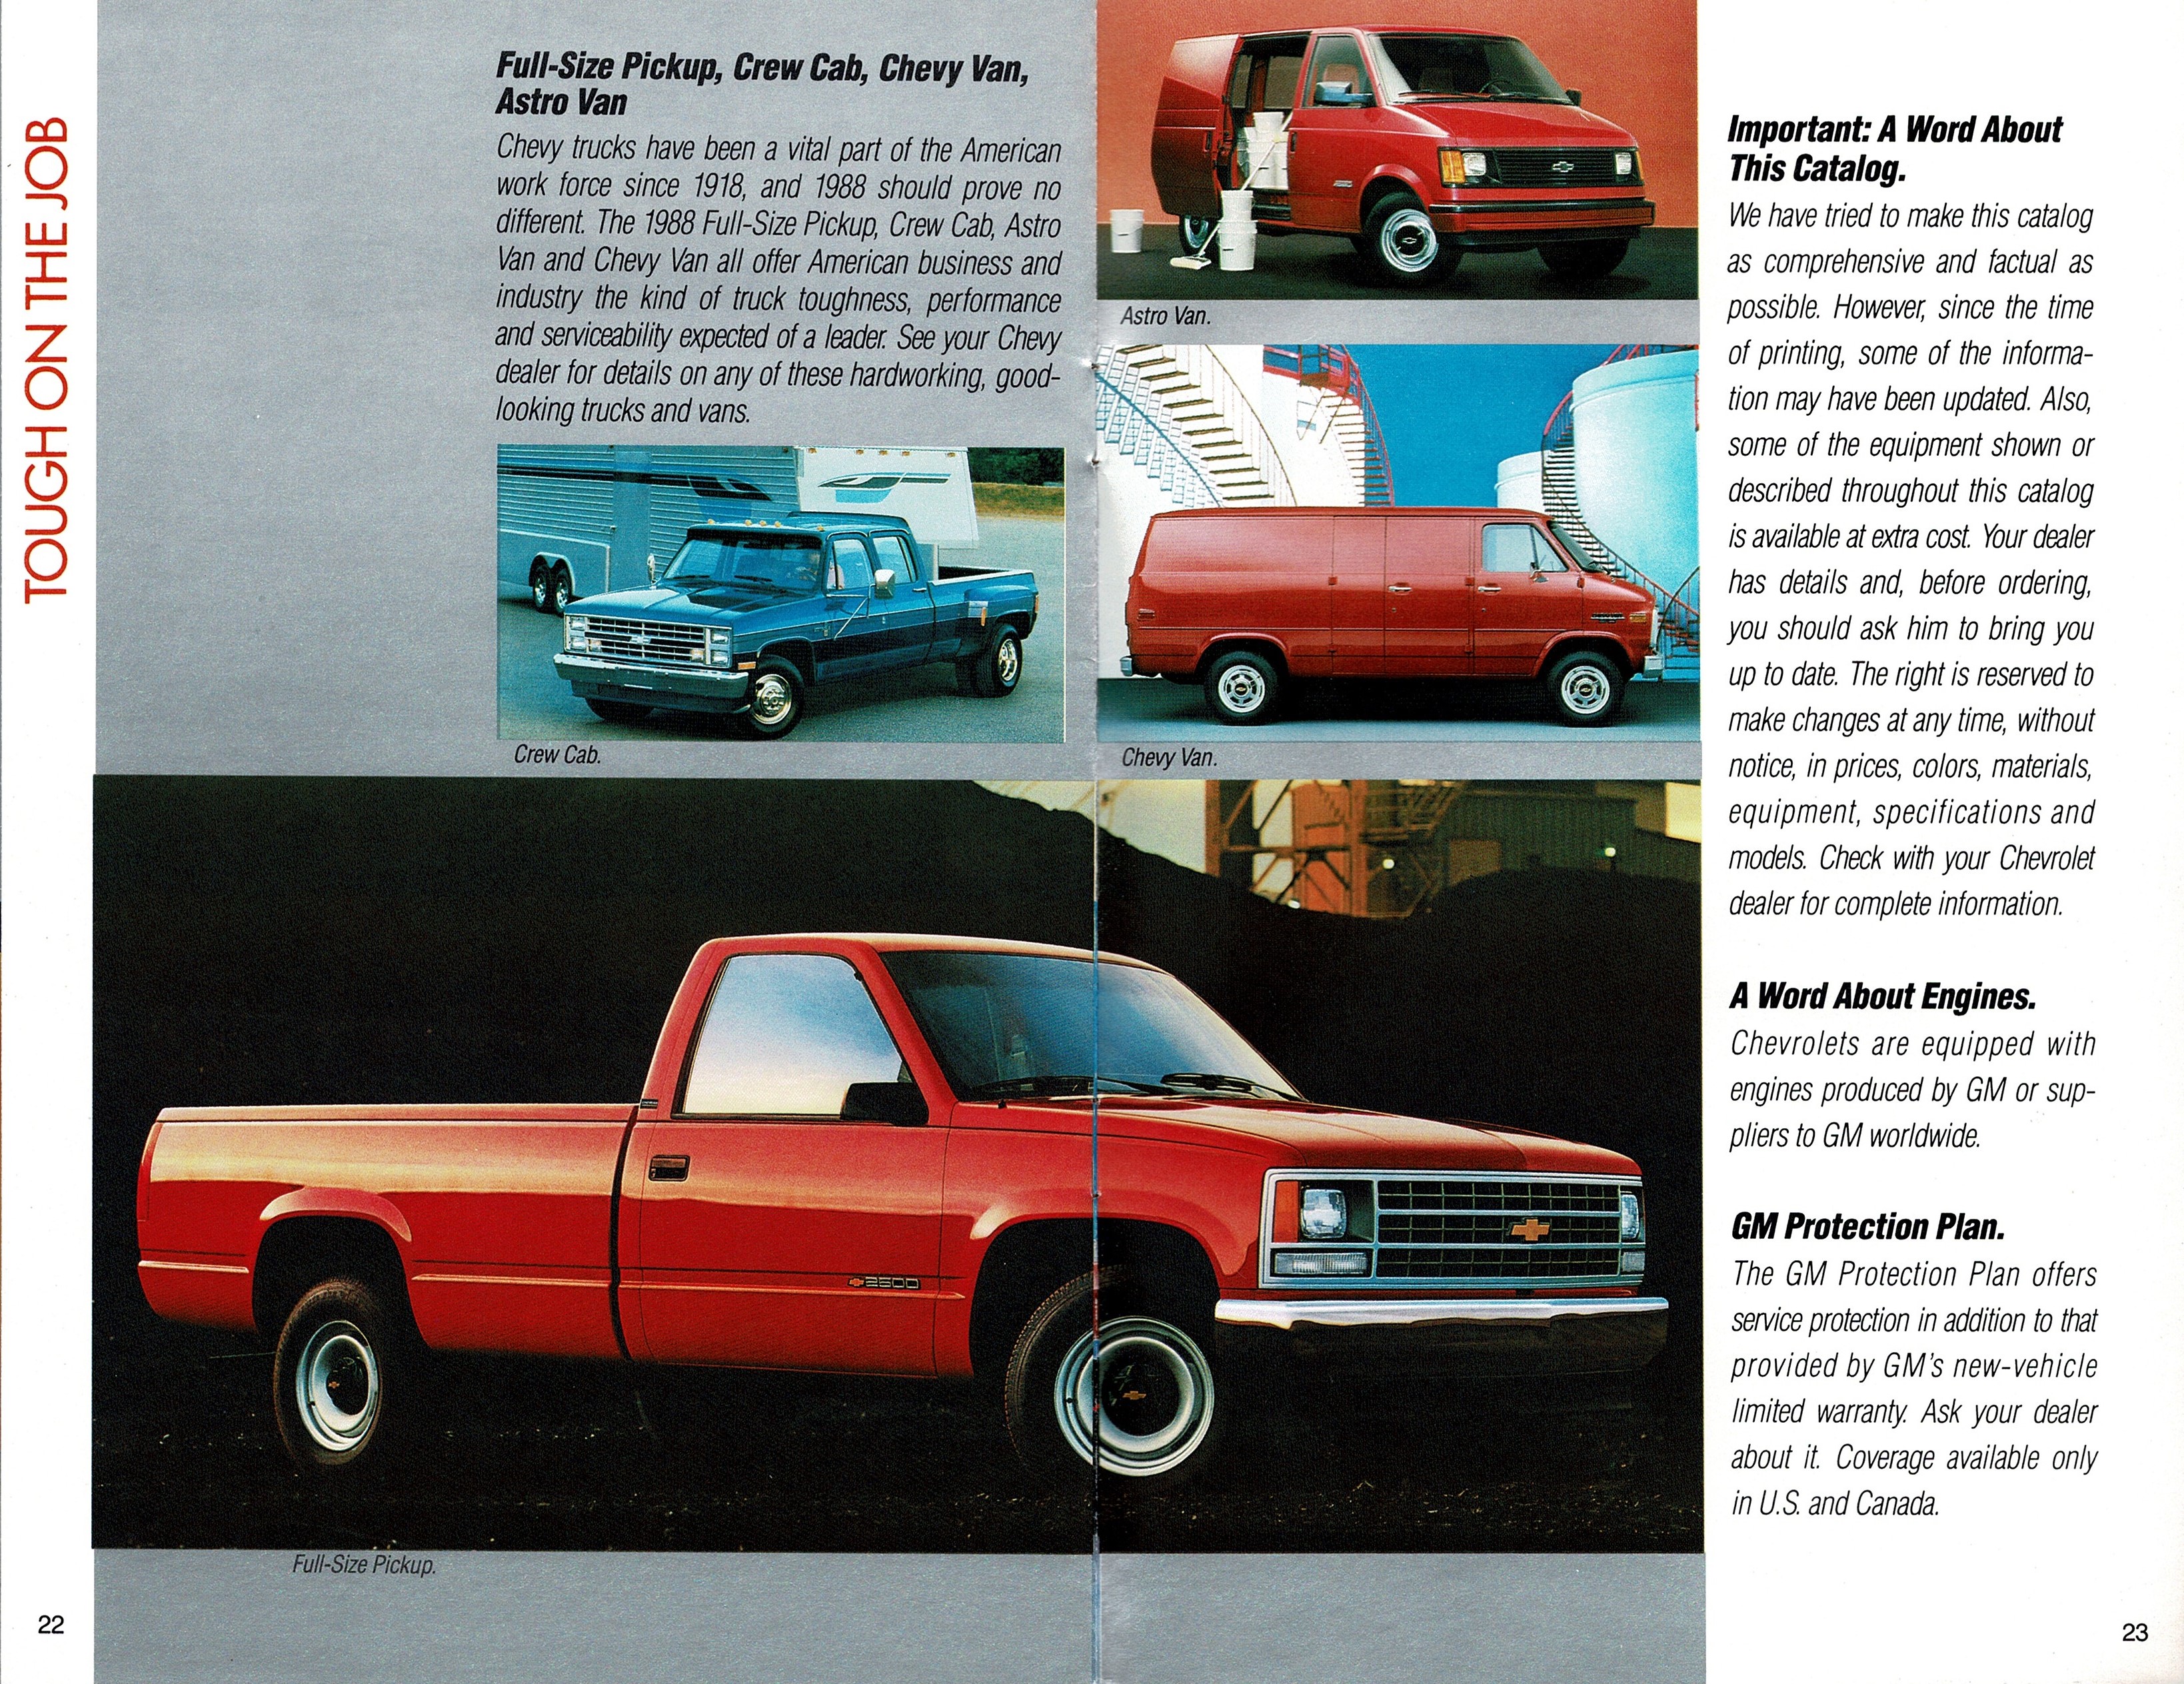 1988 Chevrolet Cars and Trucks_011